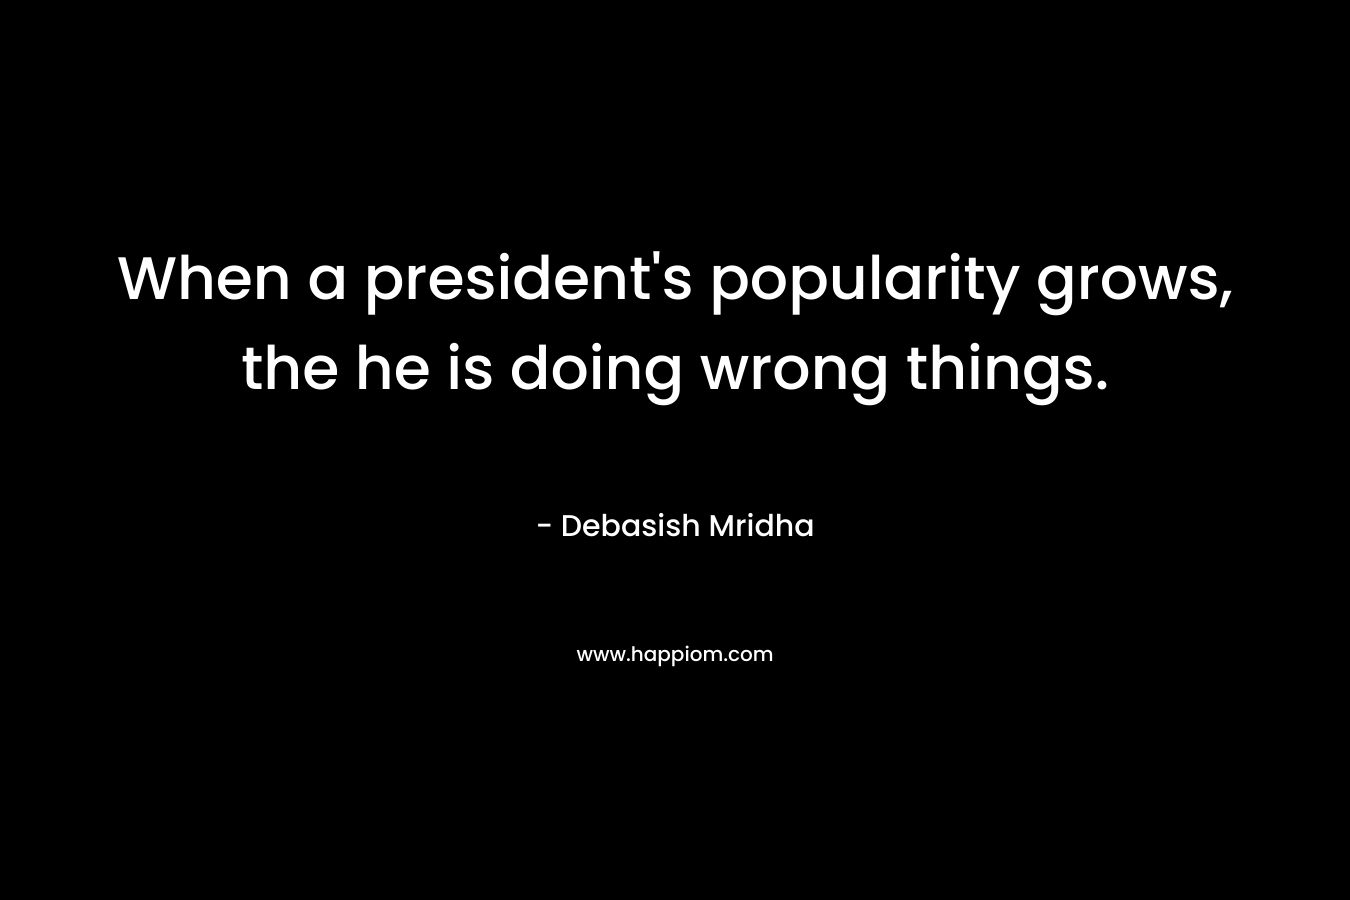 When a president’s popularity grows, the he is doing wrong things. – Debasish Mridha